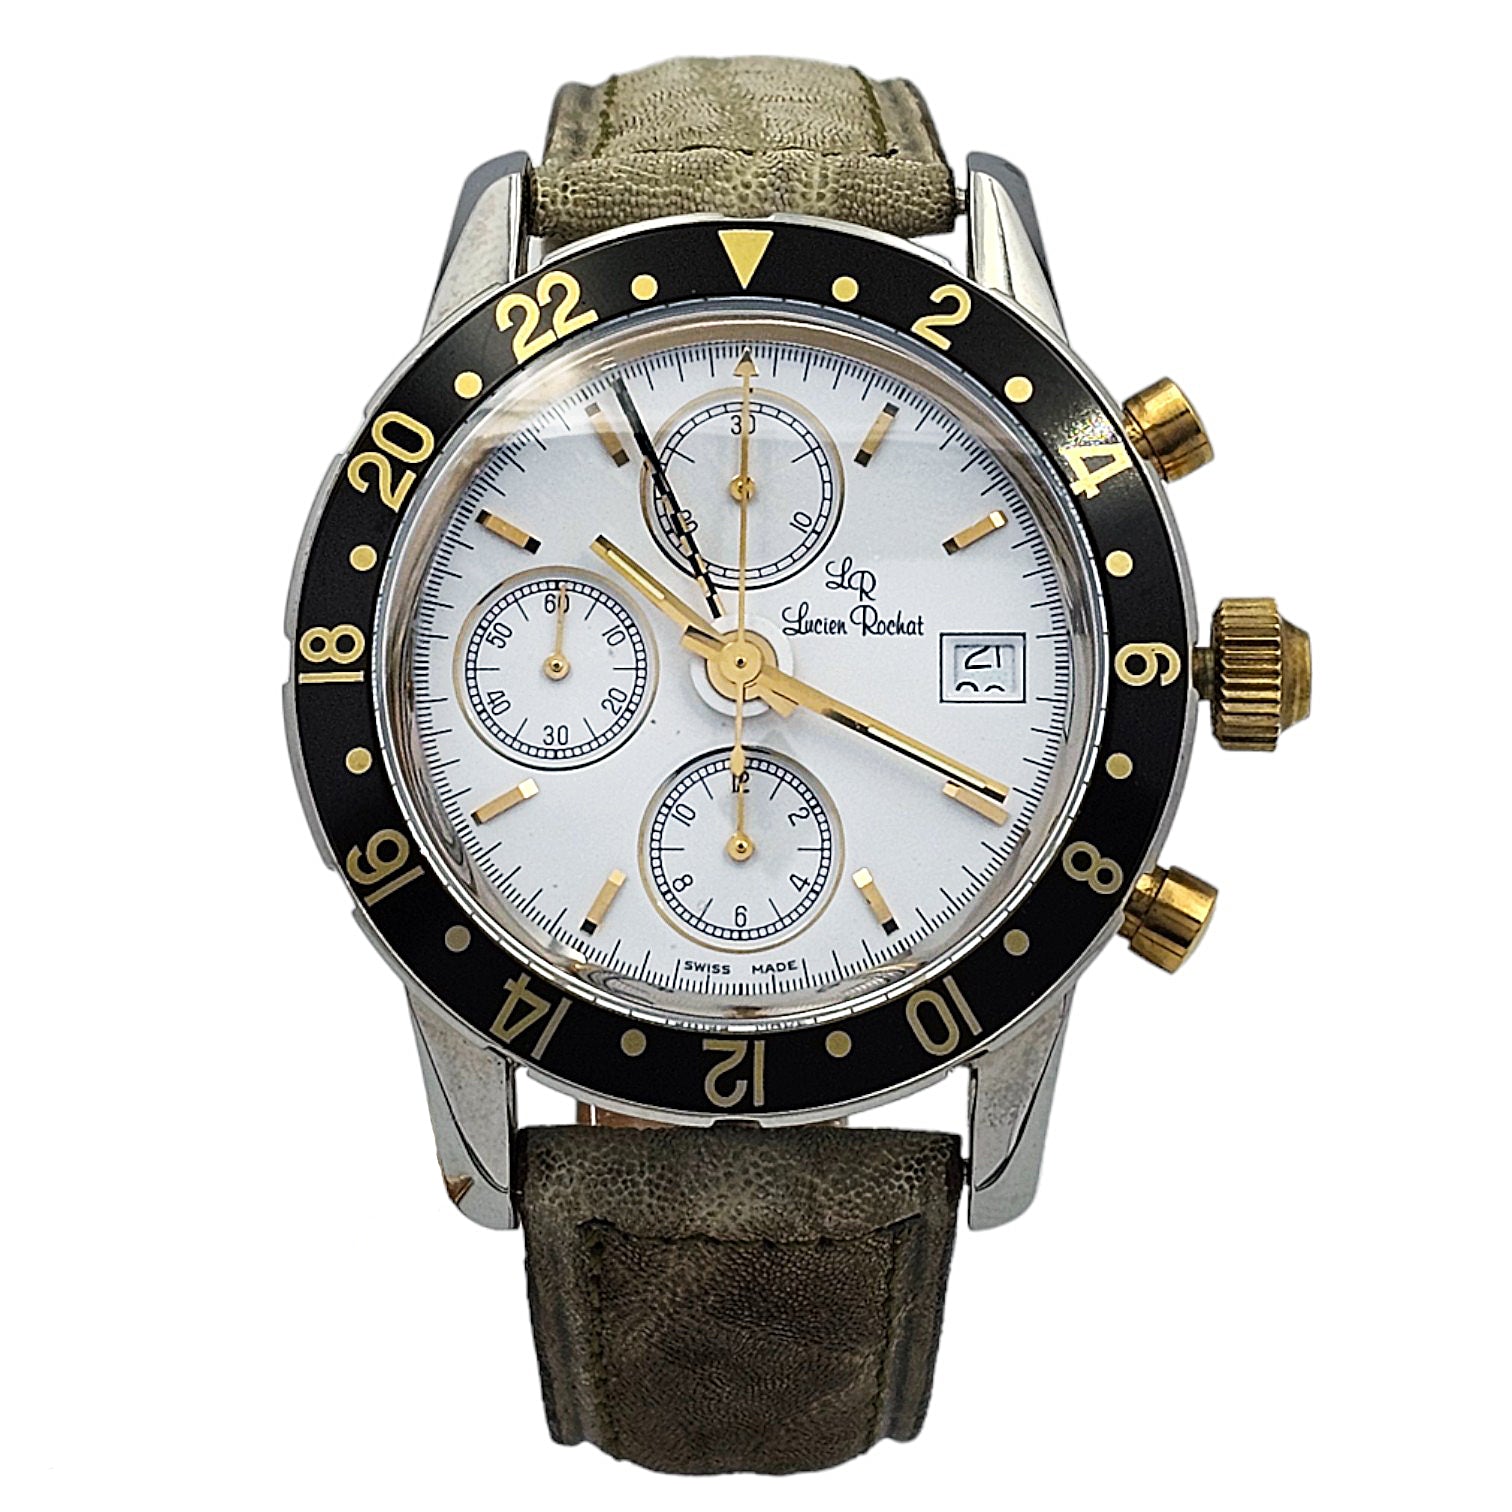 Lucien Rochat Royal Army Gmt Chrono Ref. 21.413.037 - ON6338